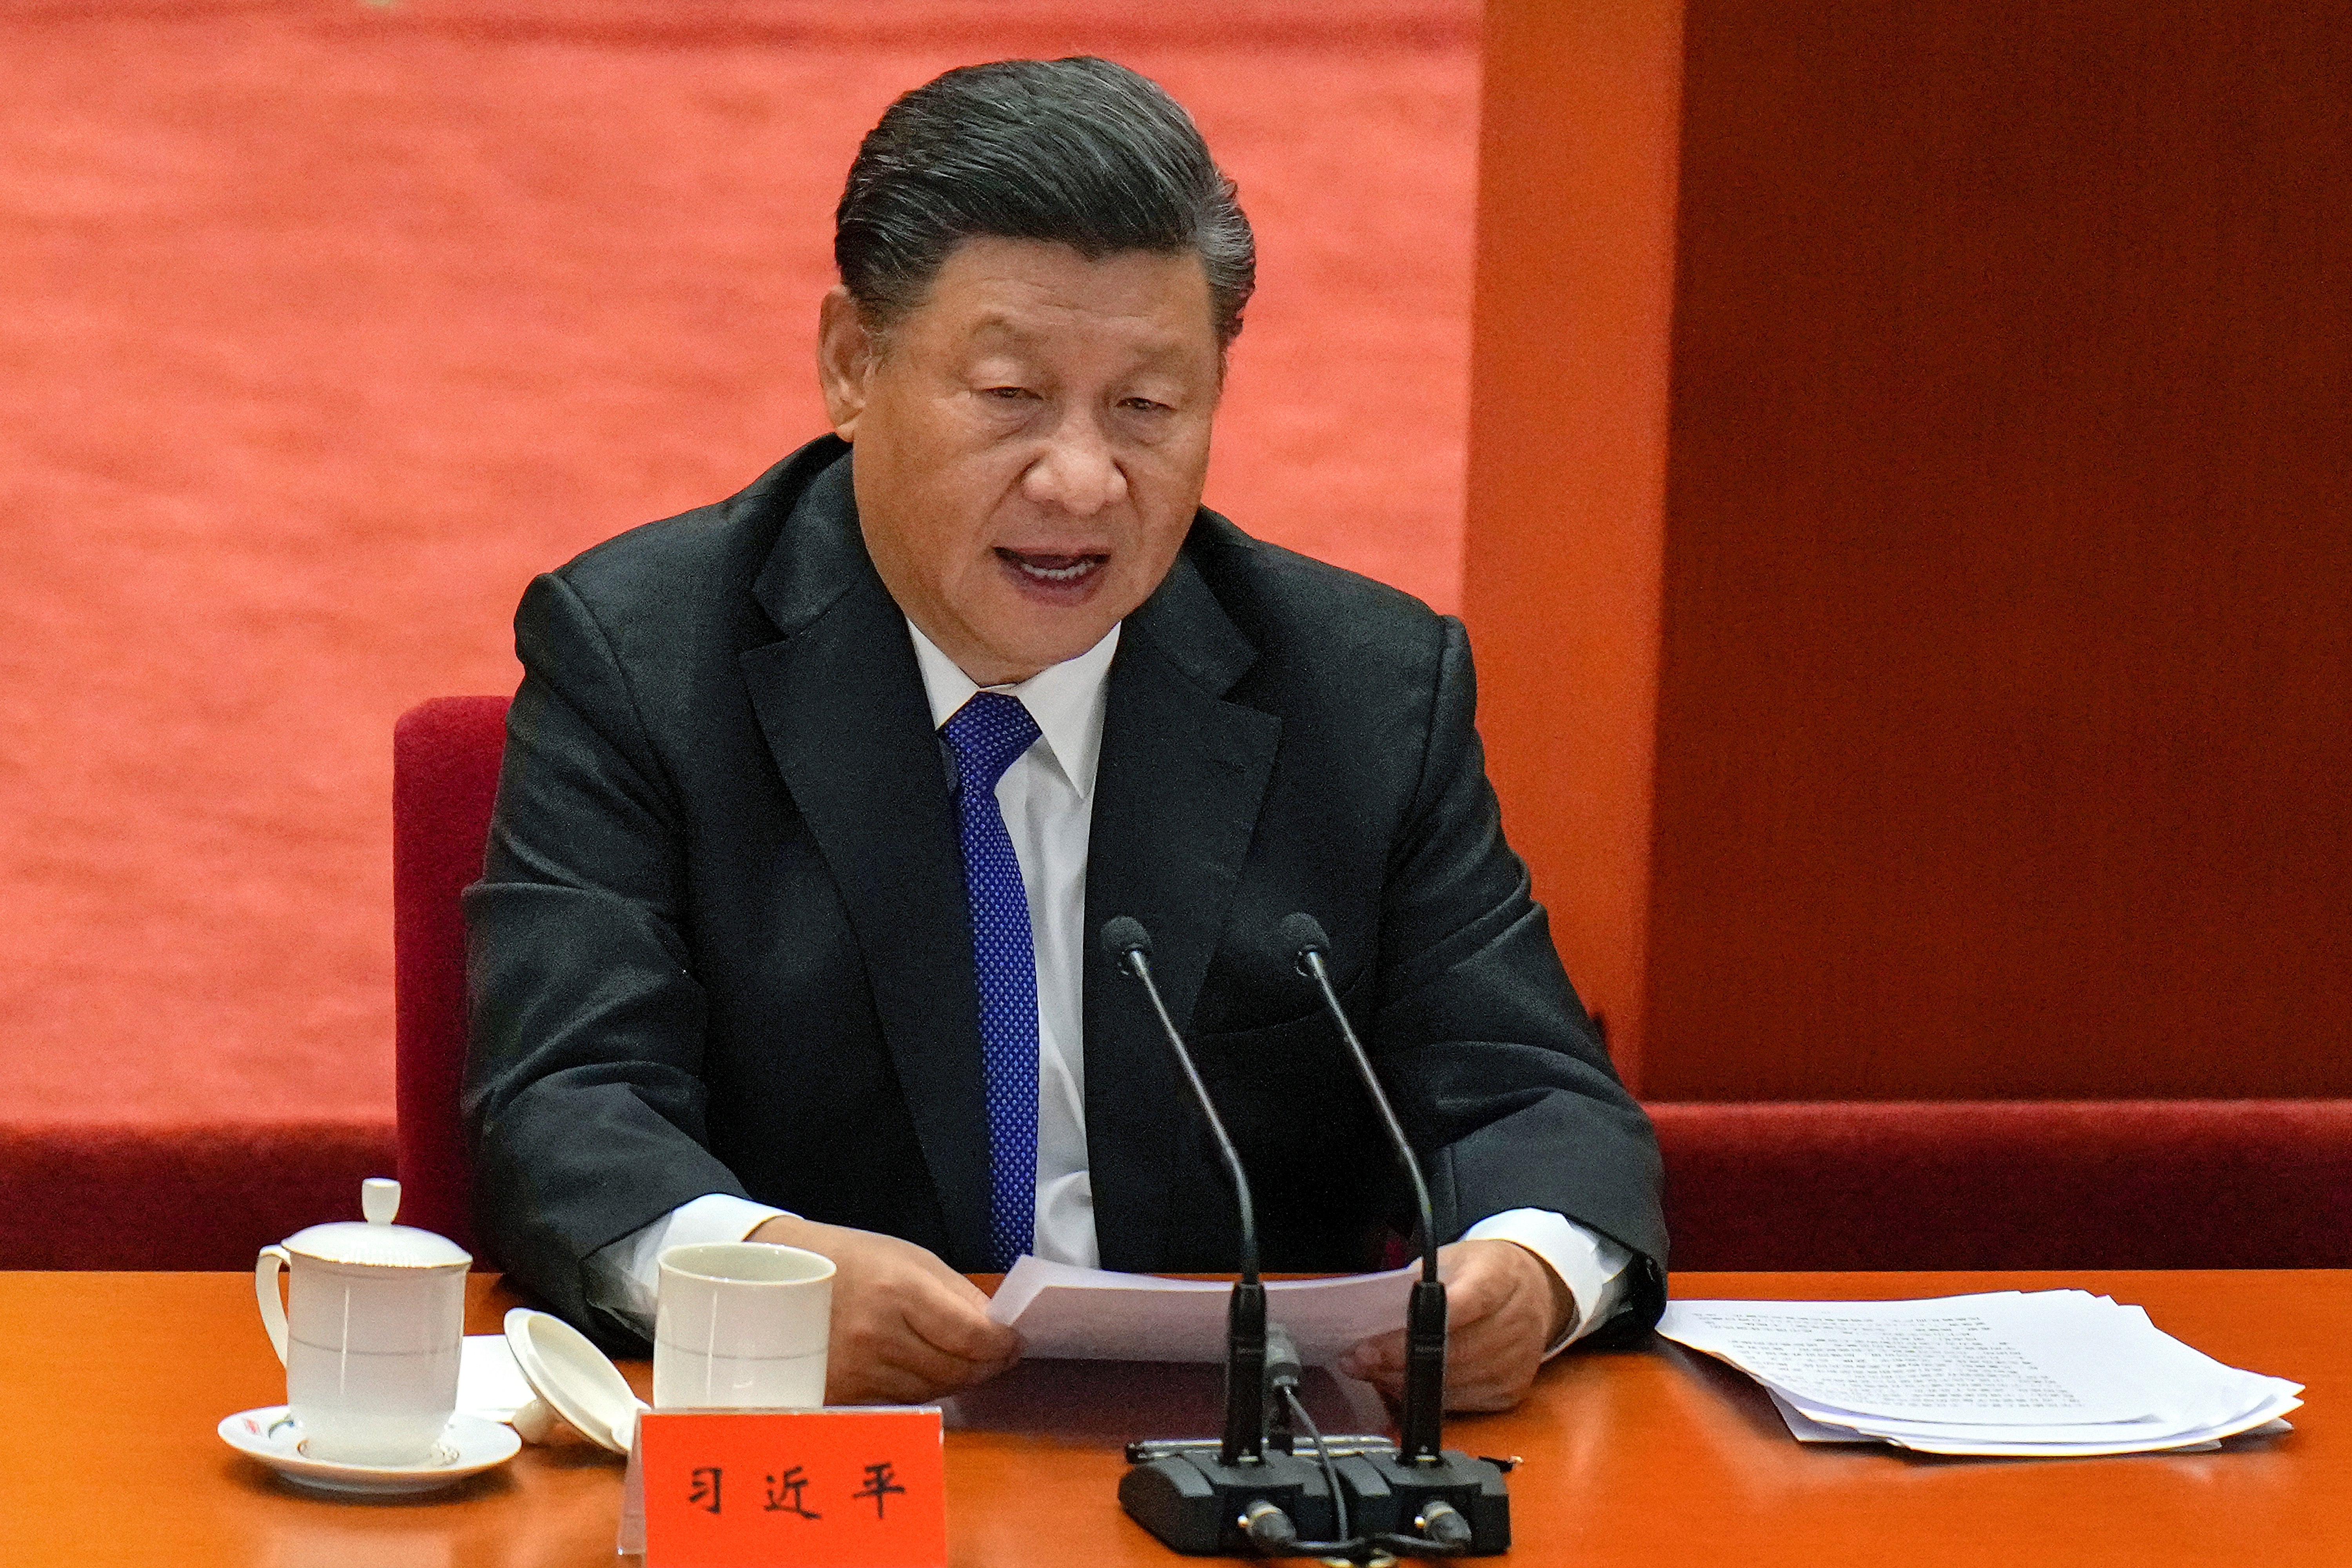 Xi Jinping appears to be laying the foundation for a third term as the all-powerful Communist Party meets in Beijing during the Central Committee's plenary session that opened on 8 November